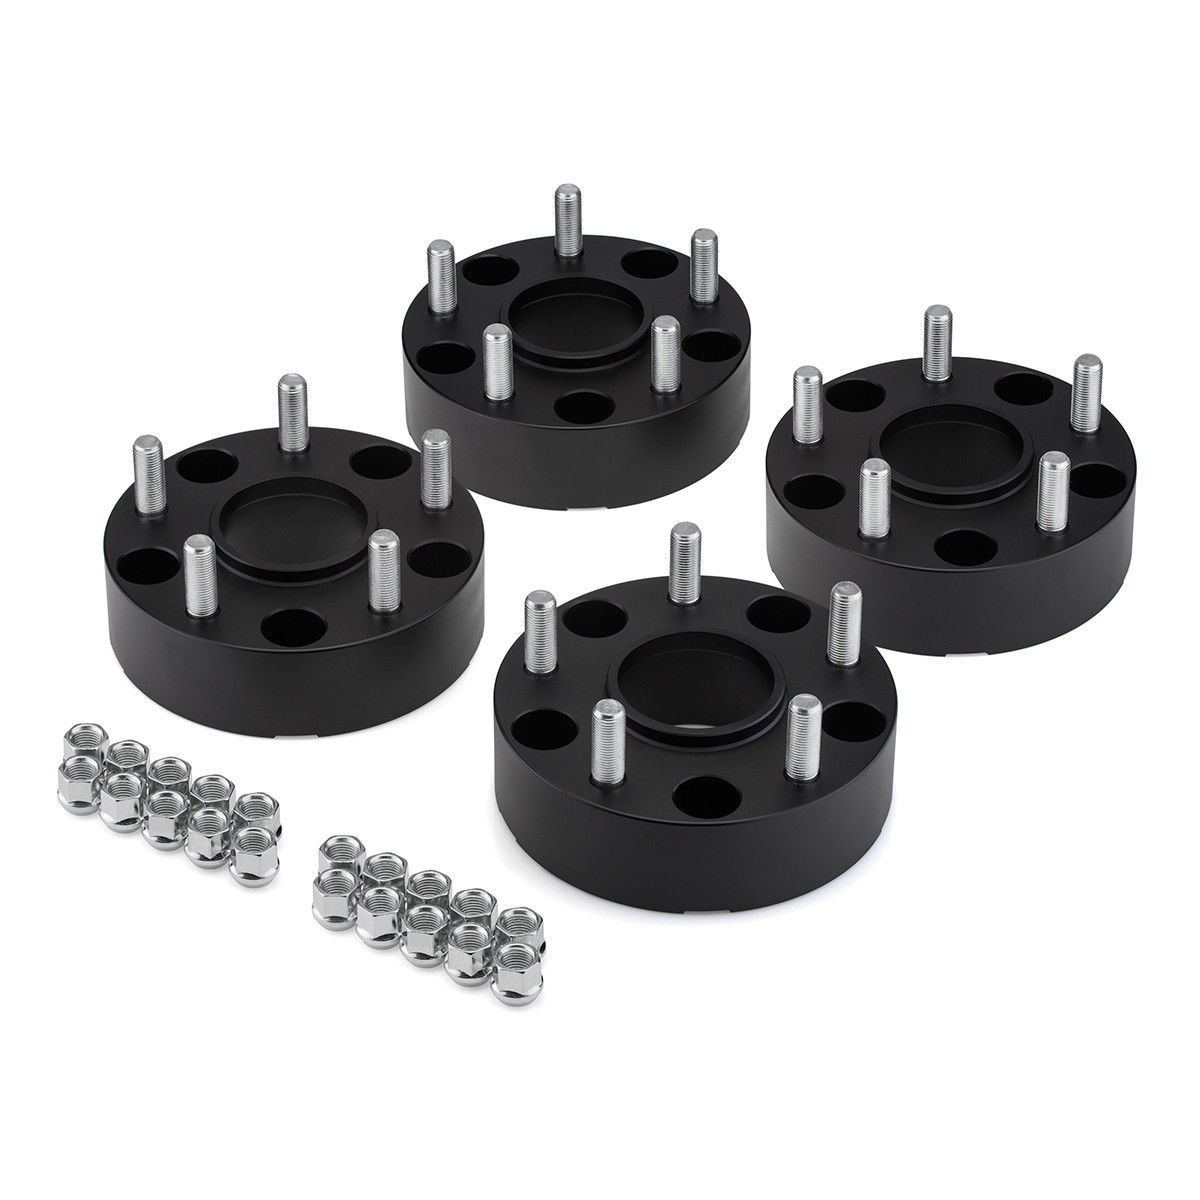 FITS 2009-2015 NISSAN GT-R Hub-Centric Wheel Spacers Kit (4pc)